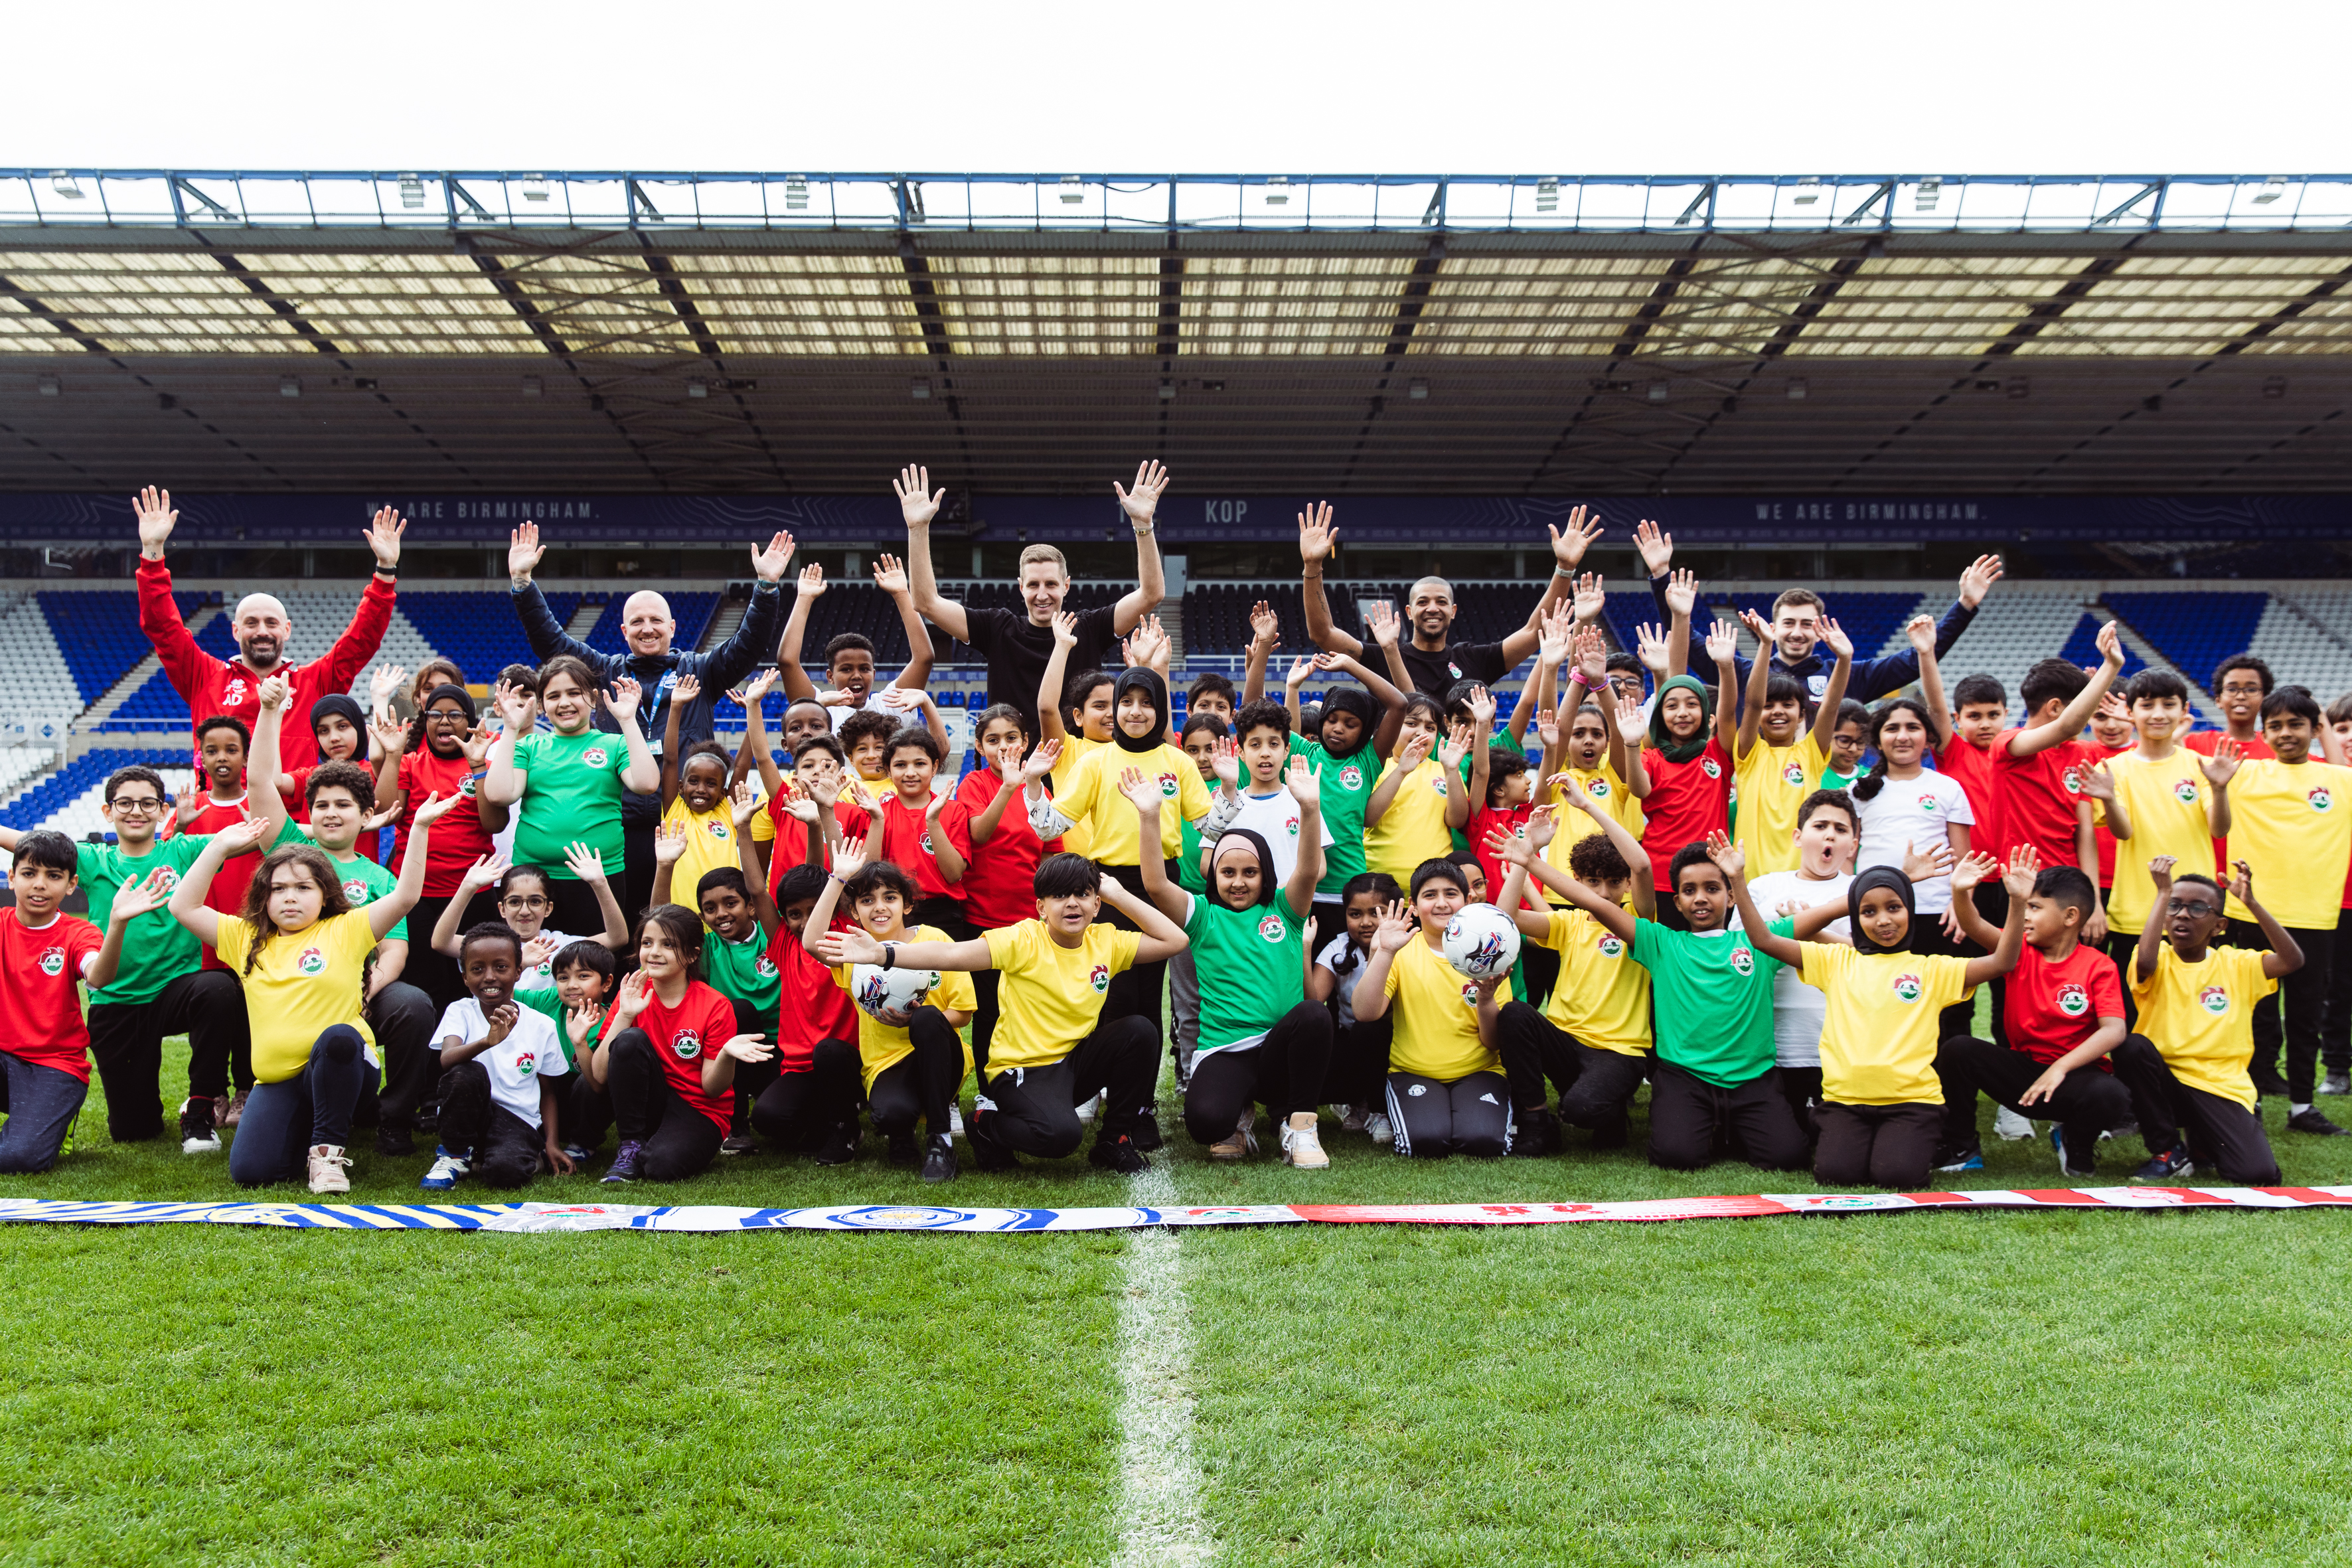 Group photos of children, players & mascots cheering with hands in the air.